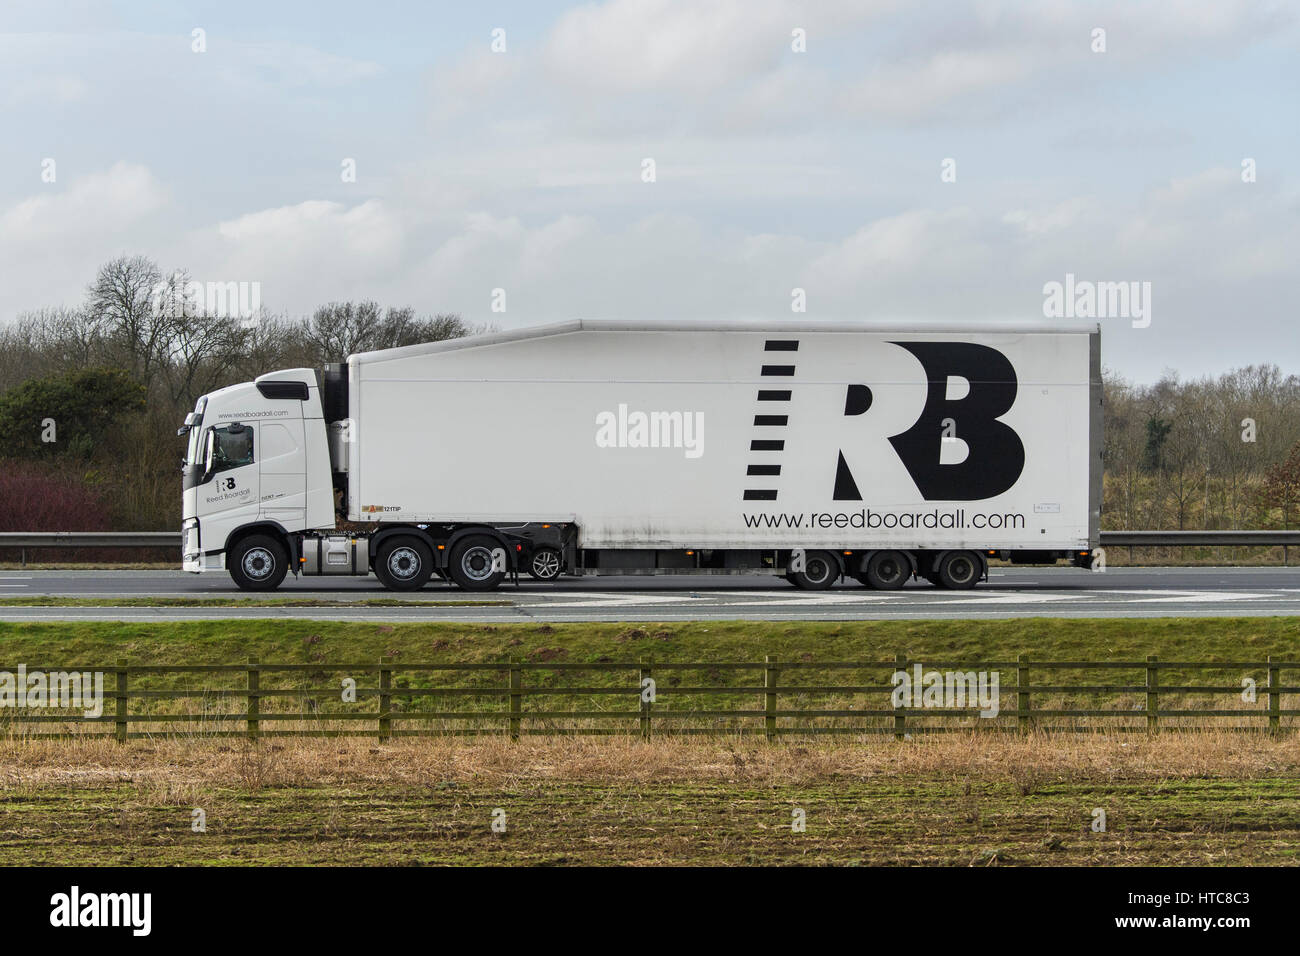 Distribution & transportation - articulated lorry, heavy goods vehicle (HGV) with Reed Boardall logo travelling on the A1 motorway - England, GB, UK. Stock Photo